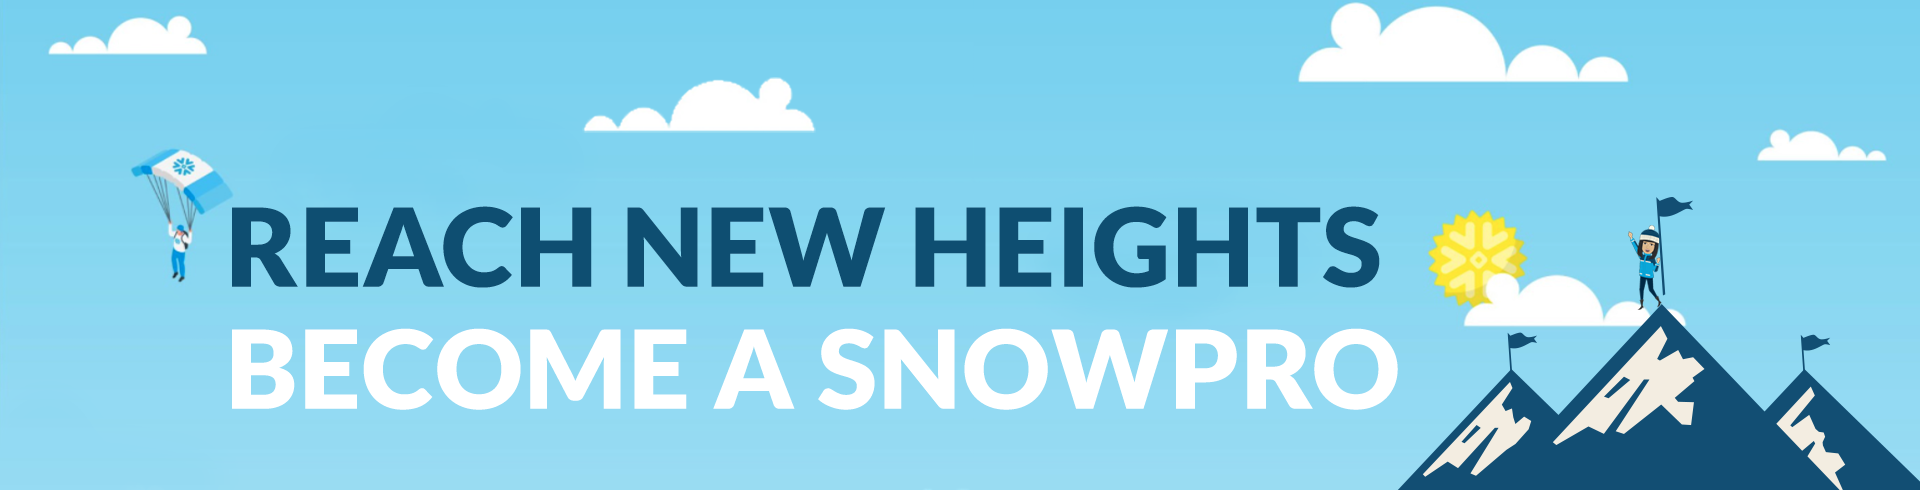 Reach New Heights Become a Snowpro